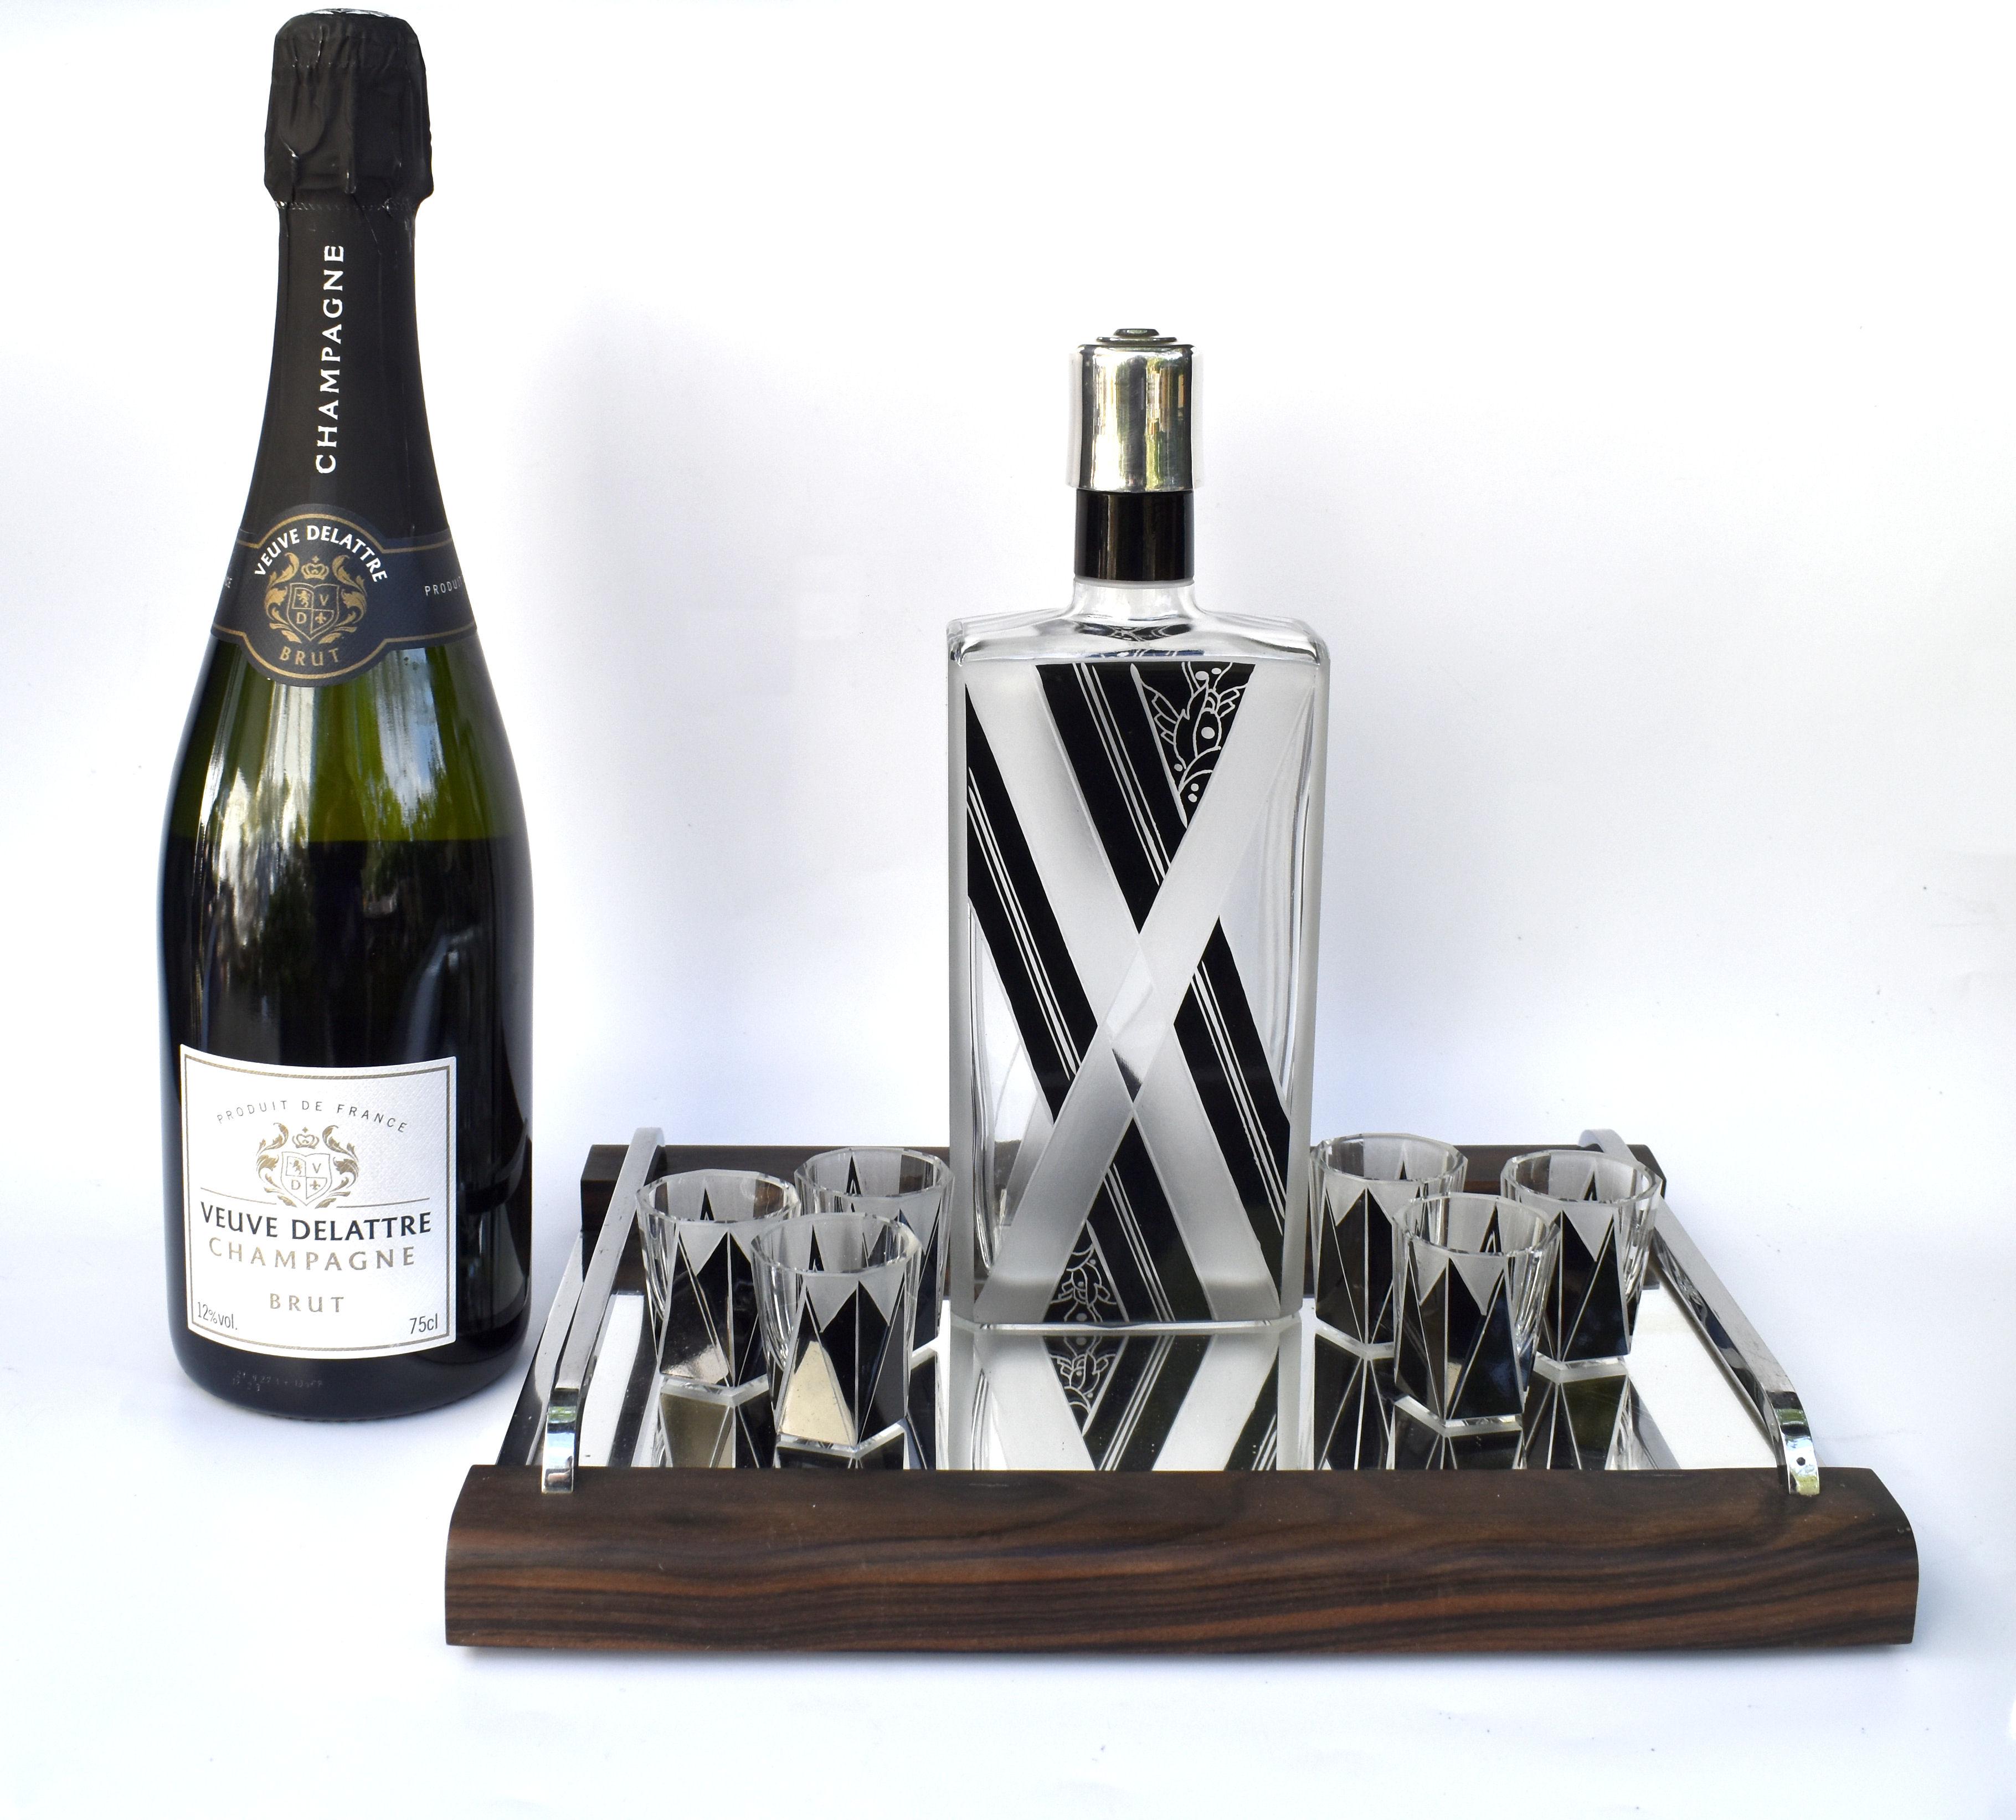 Wonderfully stylish is this Art Deco decanter set, ideal for this time of year either to gift or impress your guests. The decanter comes with six matching liquor glasses. The whole being heavily enamelled with geometric design and etched. The jet